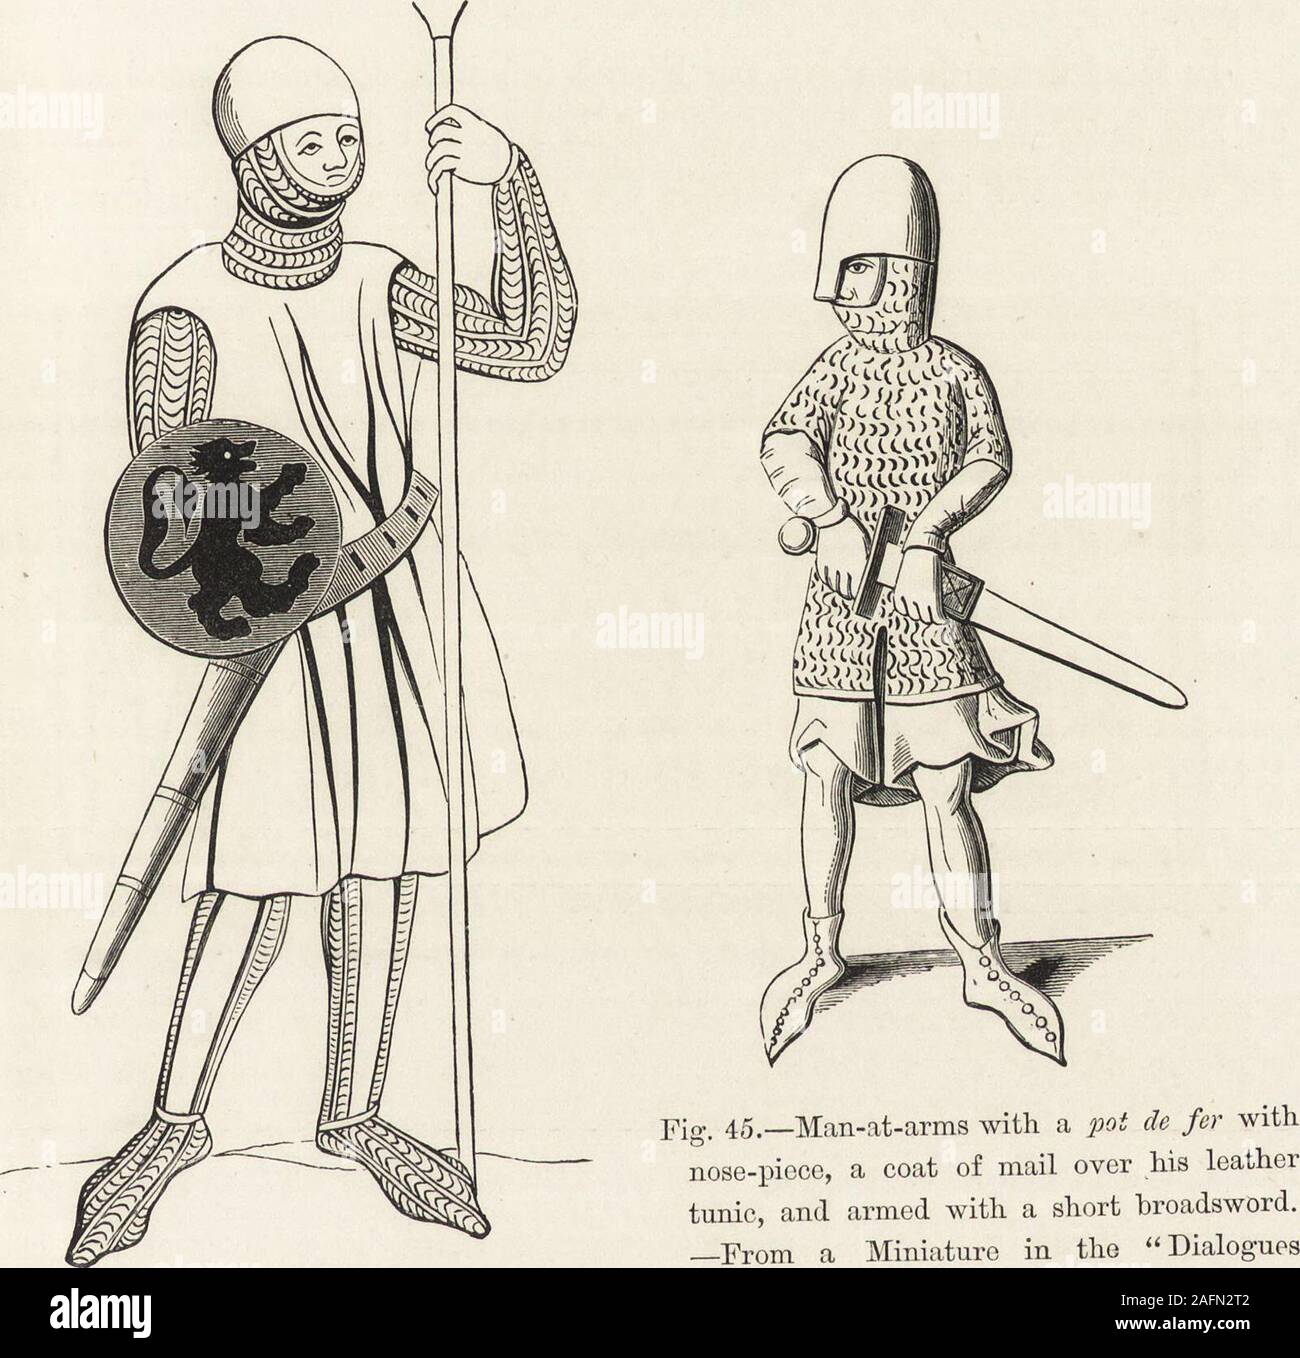 . Military and religious life in the Middle Ages and at the period of the Renaissance. the Castle of Chalus, in Limousin(1199).—Chroniqucs do Normandie, Manuscript of the Fifteenth Century (Library ofM. Ambroise Firmin-Didot). the requirements of the sovereign, he set to work on the definitive organiza-tion of a permanent paid army (Fig. 44). He fixed the age of military serviceat eighteen, and decreed that none of his subjects, except the old and thesick, should be exempt from it, unless they paid a certain sum to the royaltreasury, and supplied, according to their rank and means, one or more Stock Photo